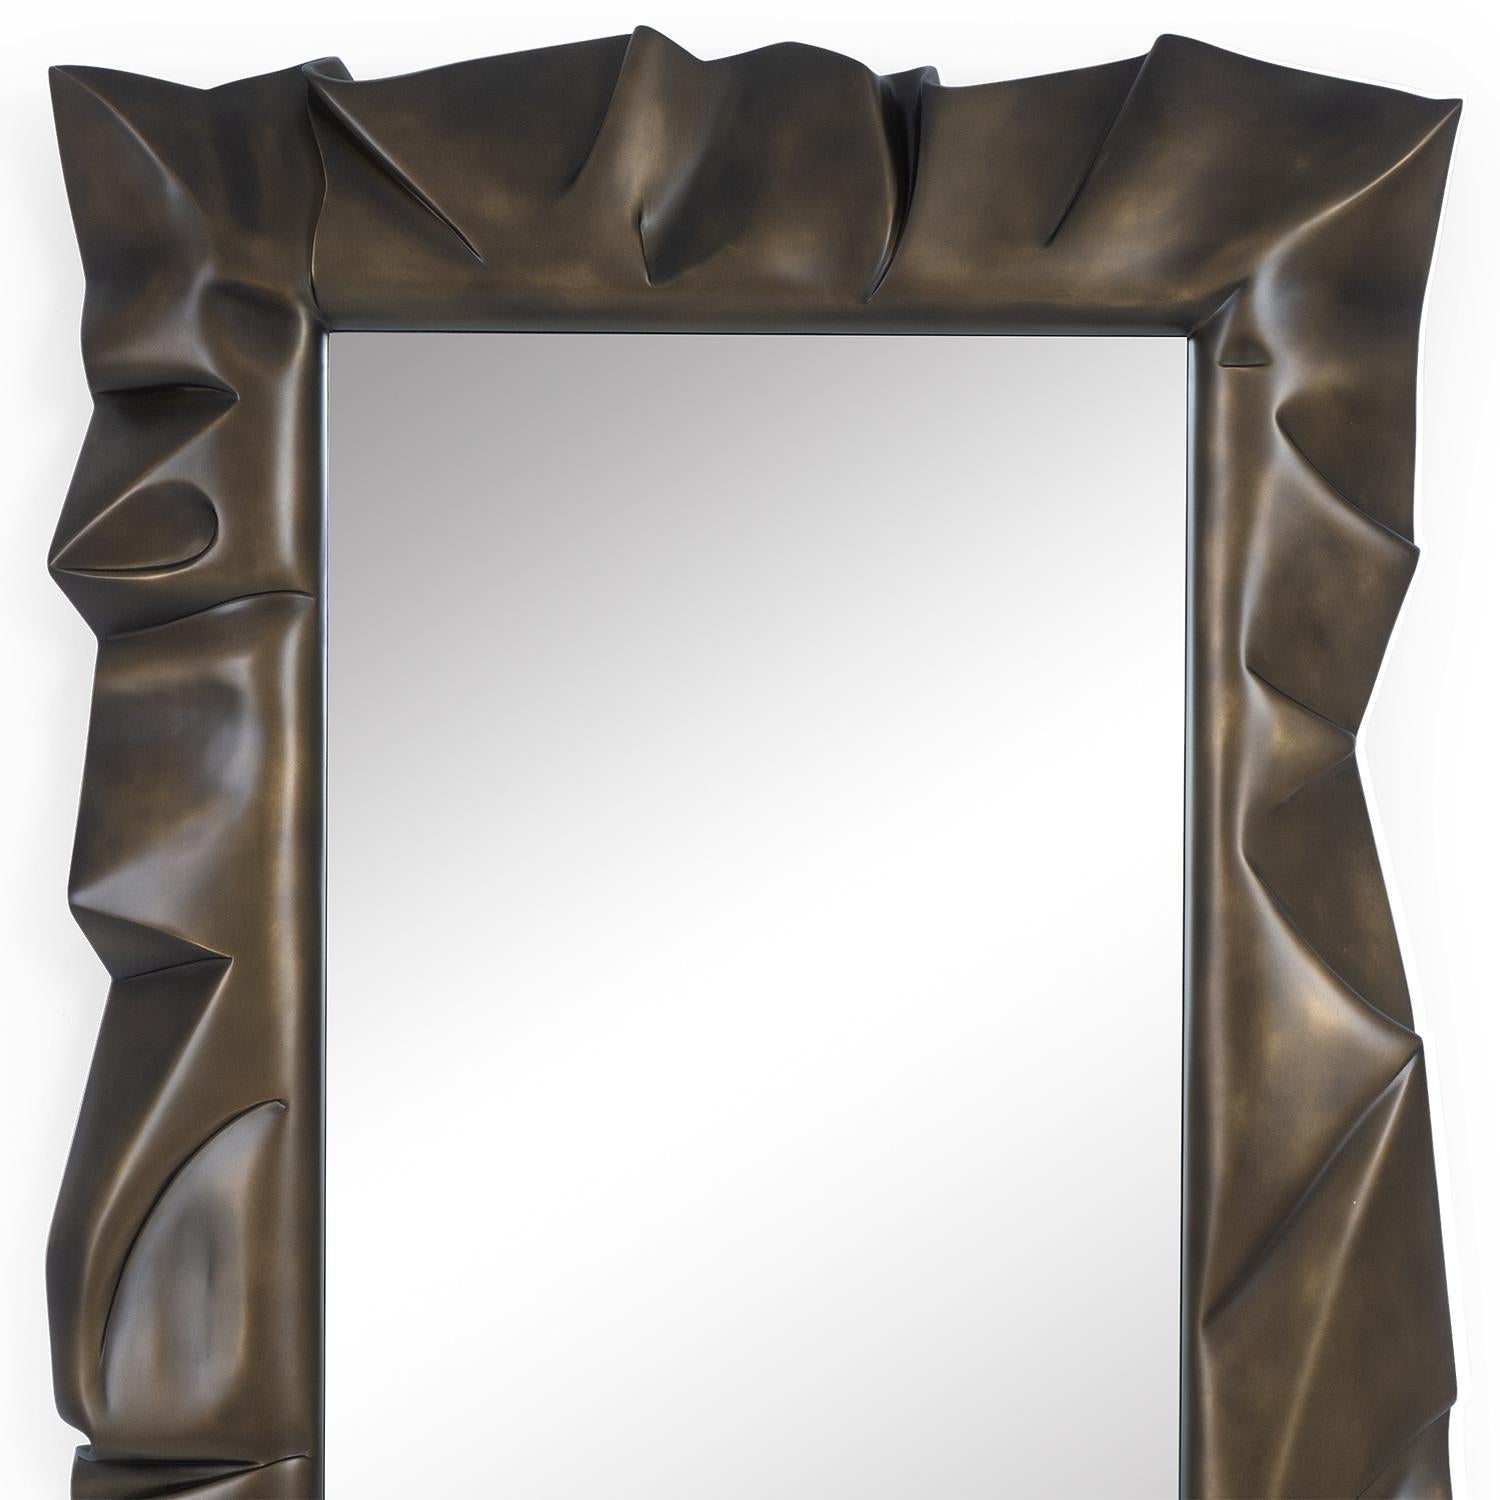 Mirror Armor bronzage with hand carved solid
mahogany wood frame, handcrafted with bronzage
finish. With mirror glass with polished edges.
Also available in tobacco finish, or black satin, or
white satin finish, or gold leaf finish.
Available in:
L